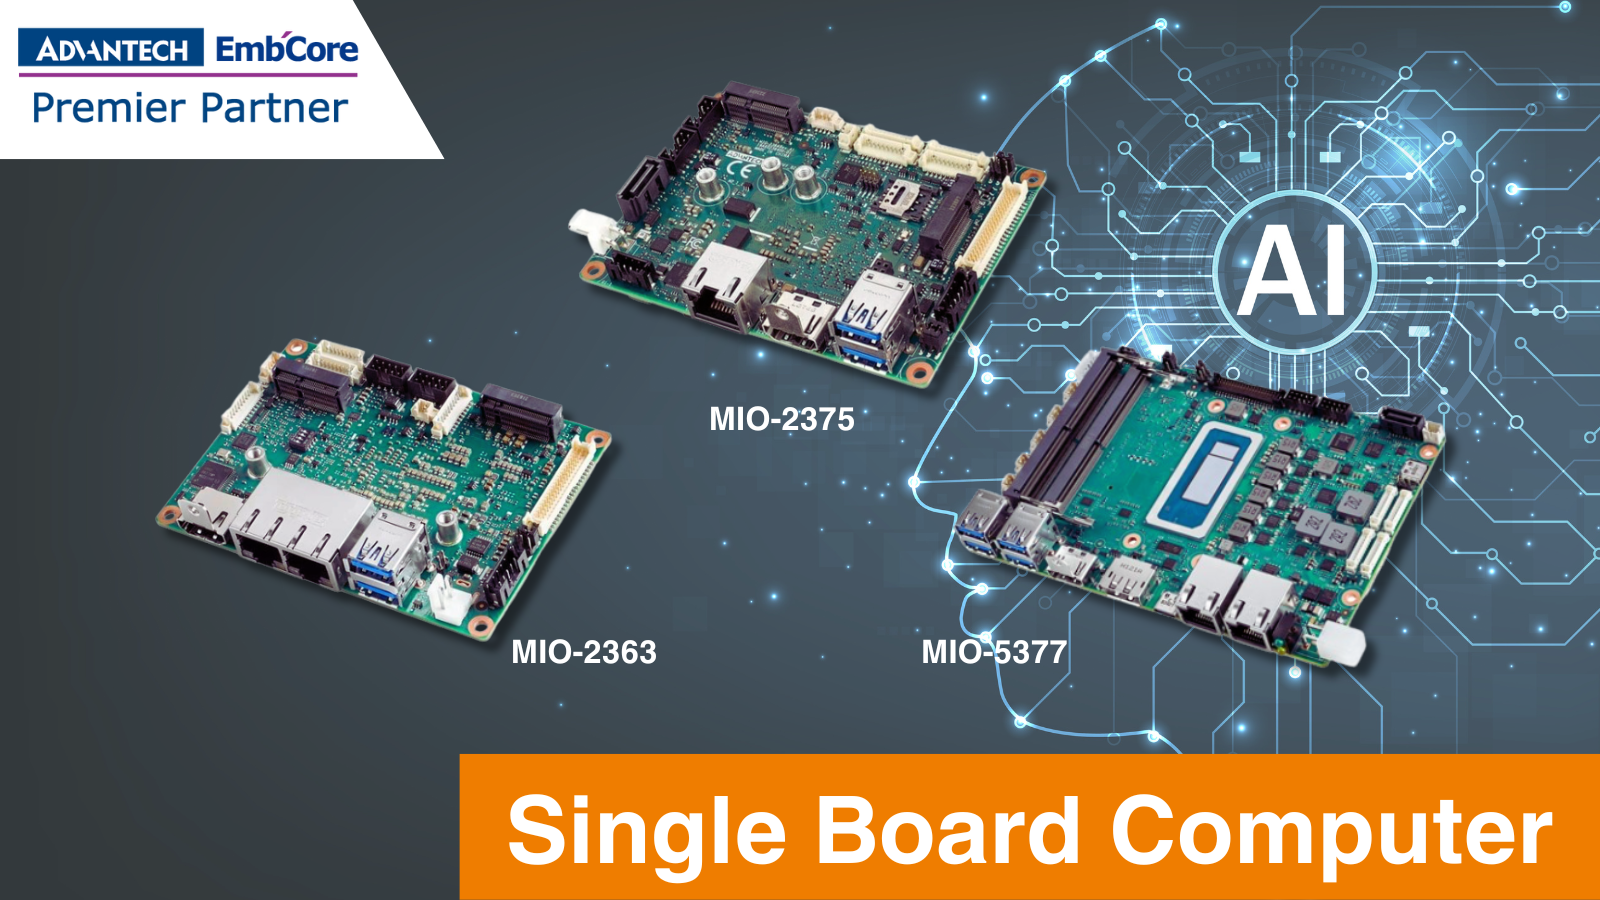 You are currently viewing Single board computer for AI tasks: Advantech MIO-2363, MIO-2375, and MIO-5377 